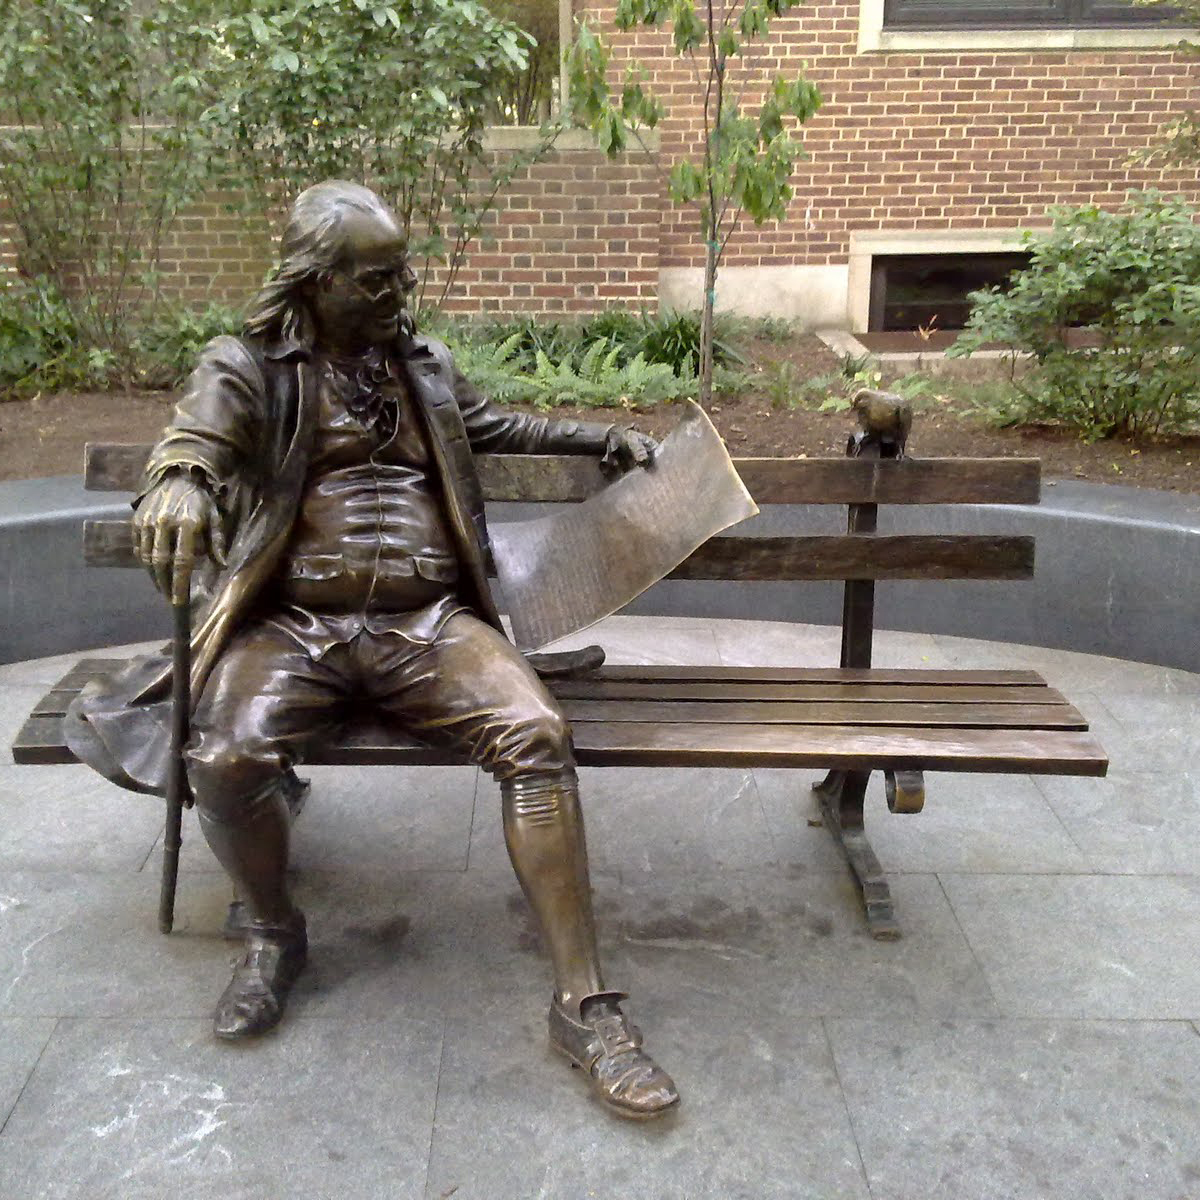 Bronze statue of at ben on the bench